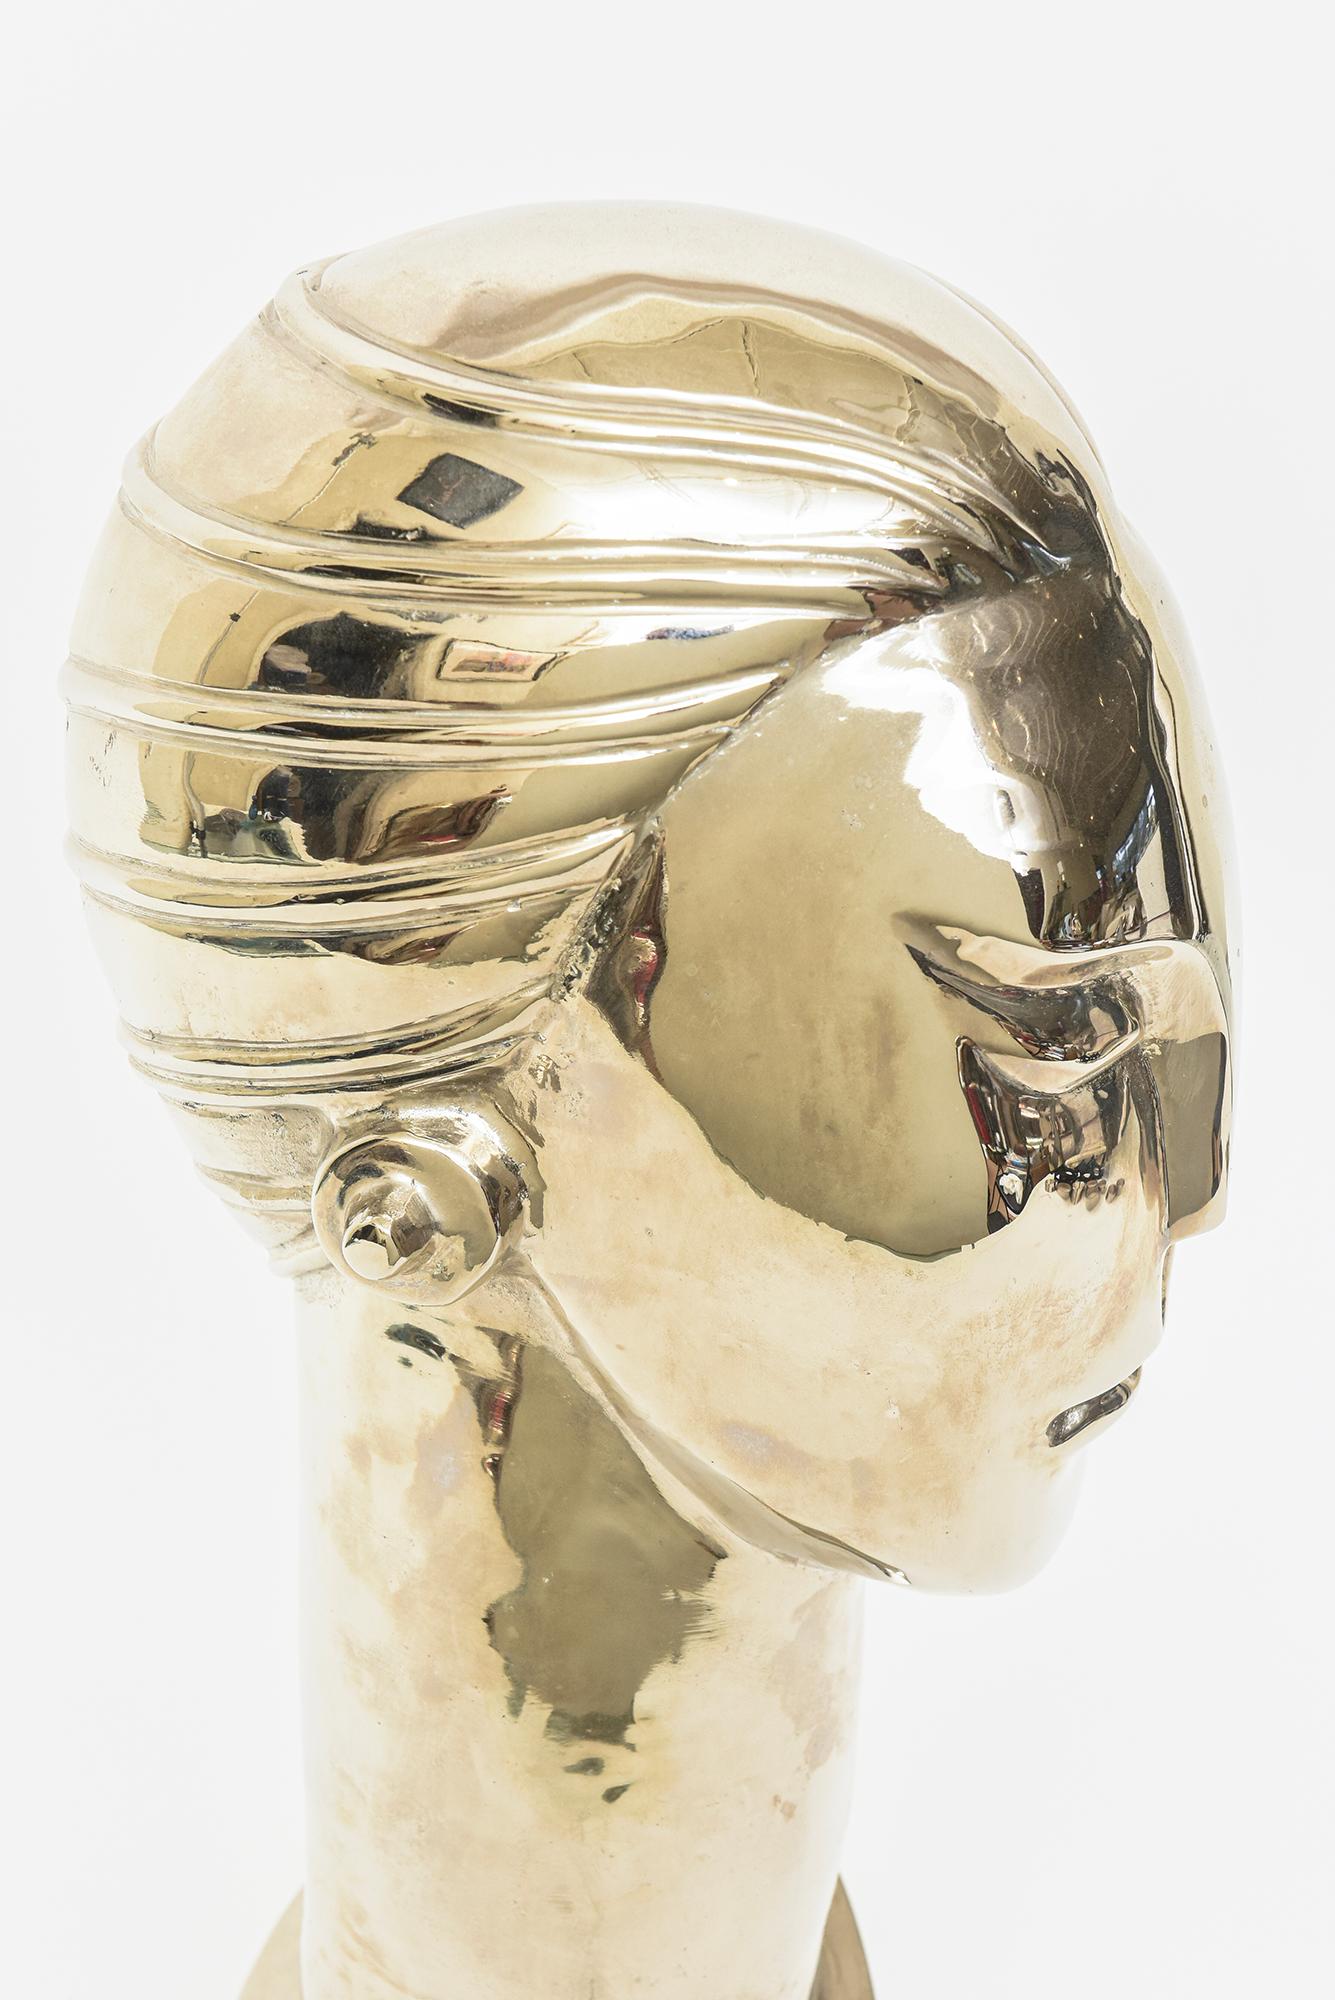 Nickel Silver Over Brass Art Deco Stylized Tall Head Bust Figurative Sculpture  For Sale 7